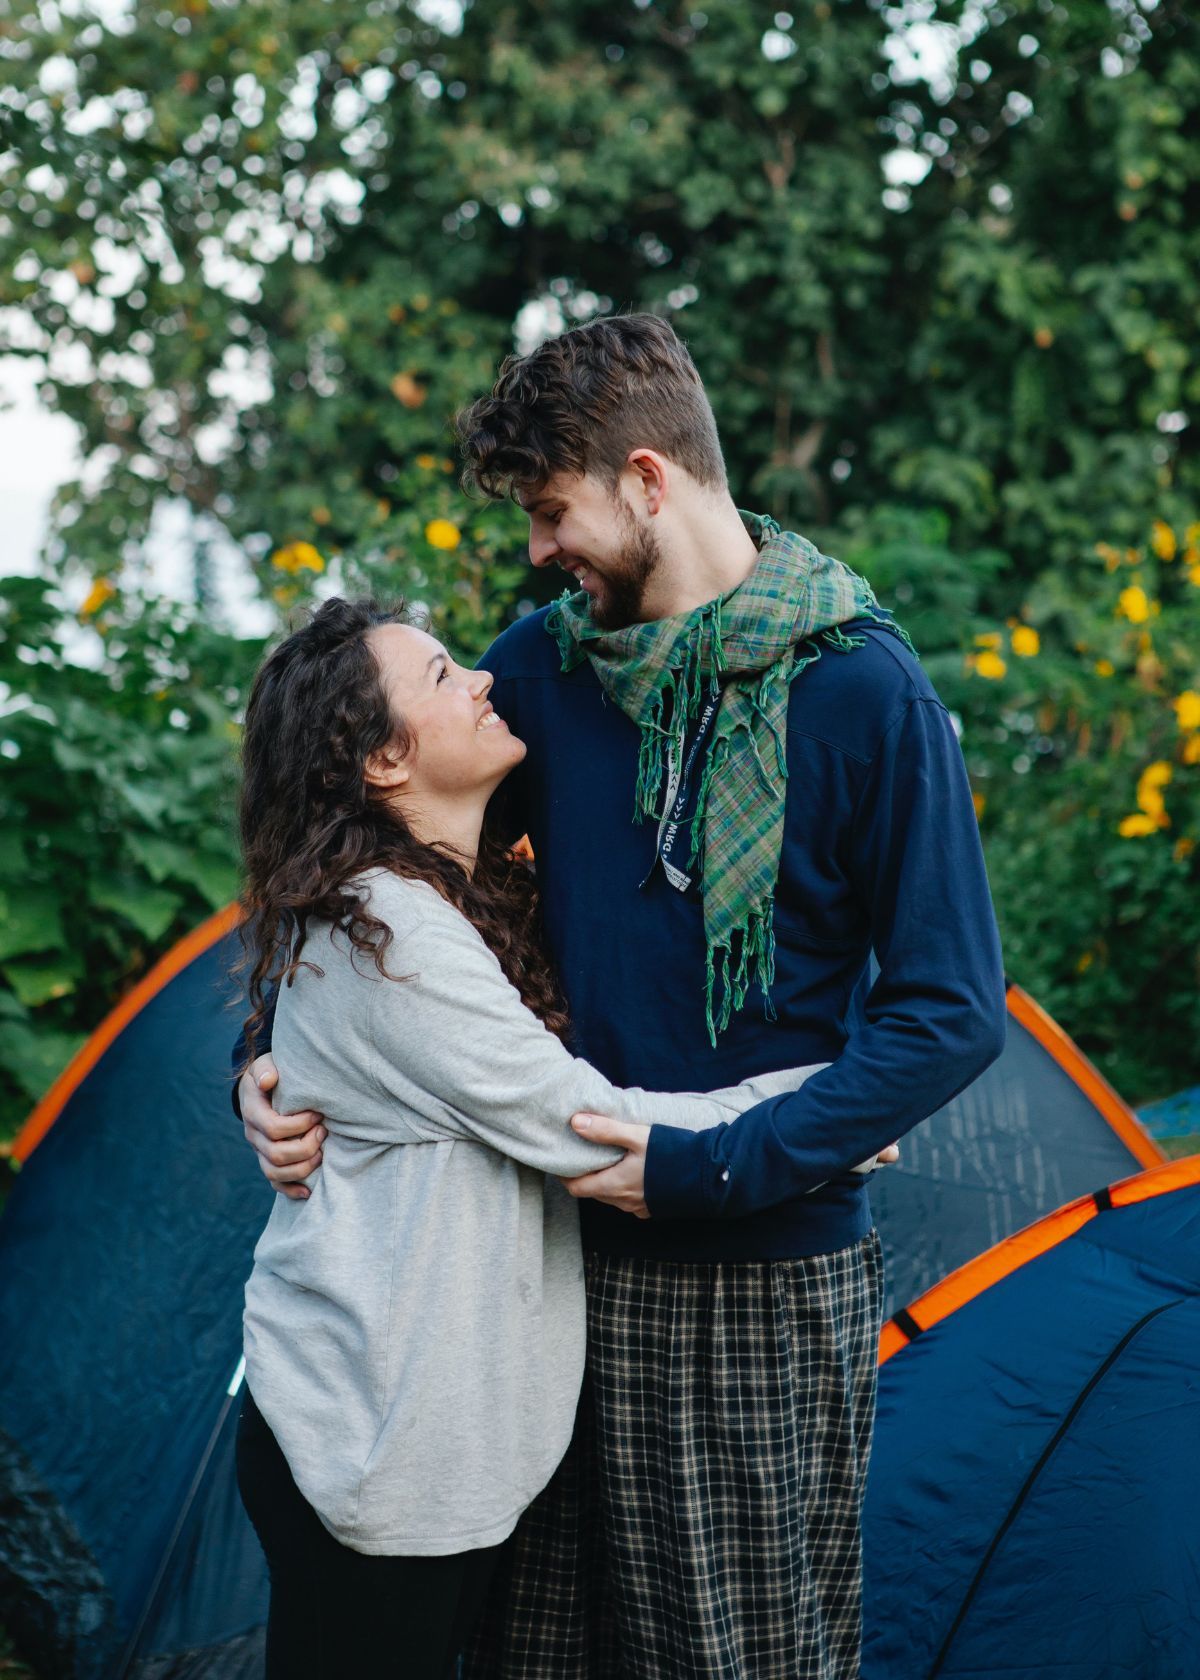 Tips for camping with your partner